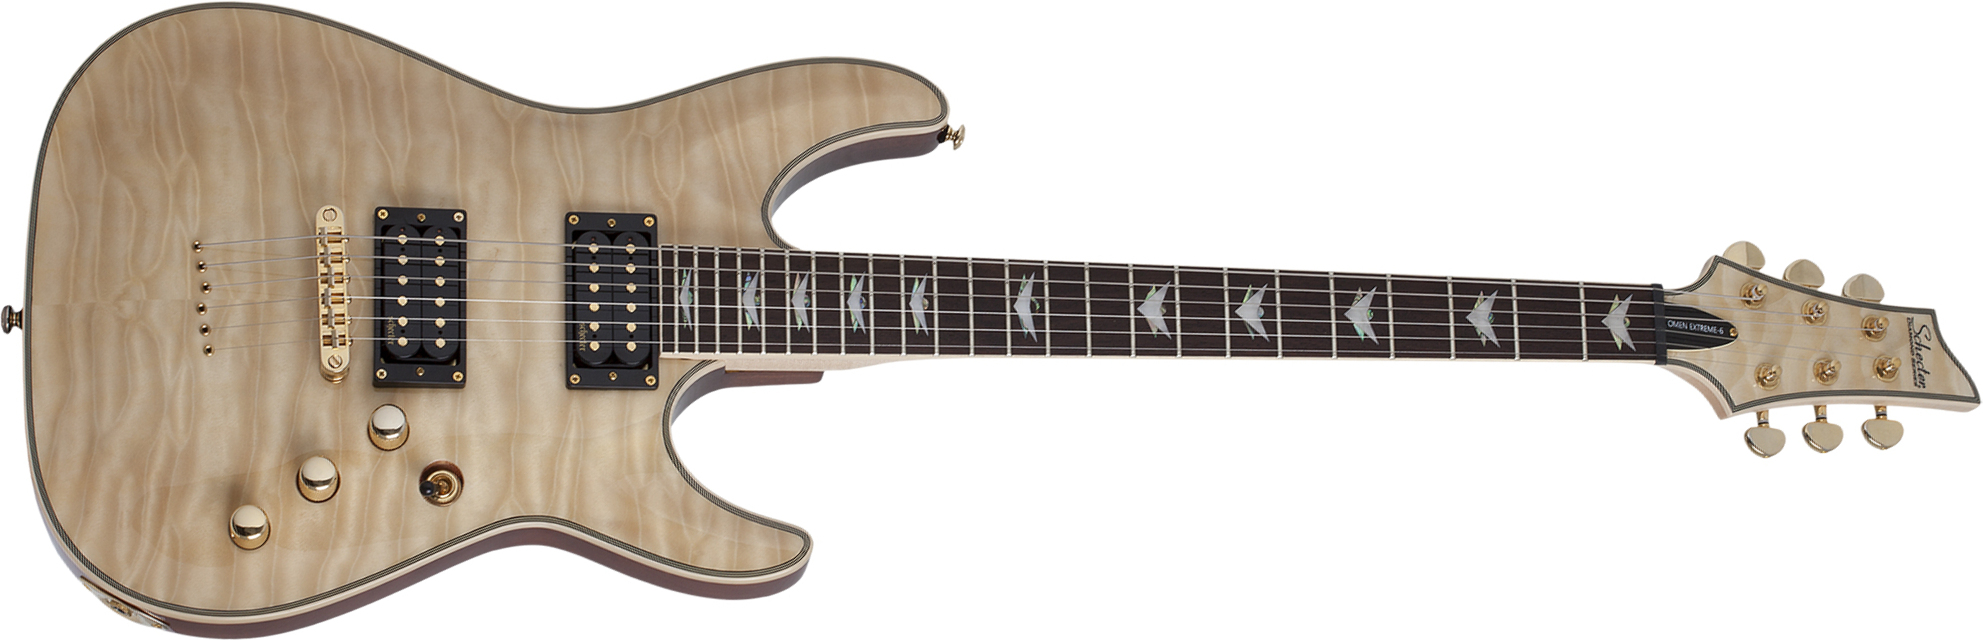 Schecter Omen Extreme-6 2h  Ht Rw - Gloss Natural - Str shape electric guitar - Main picture